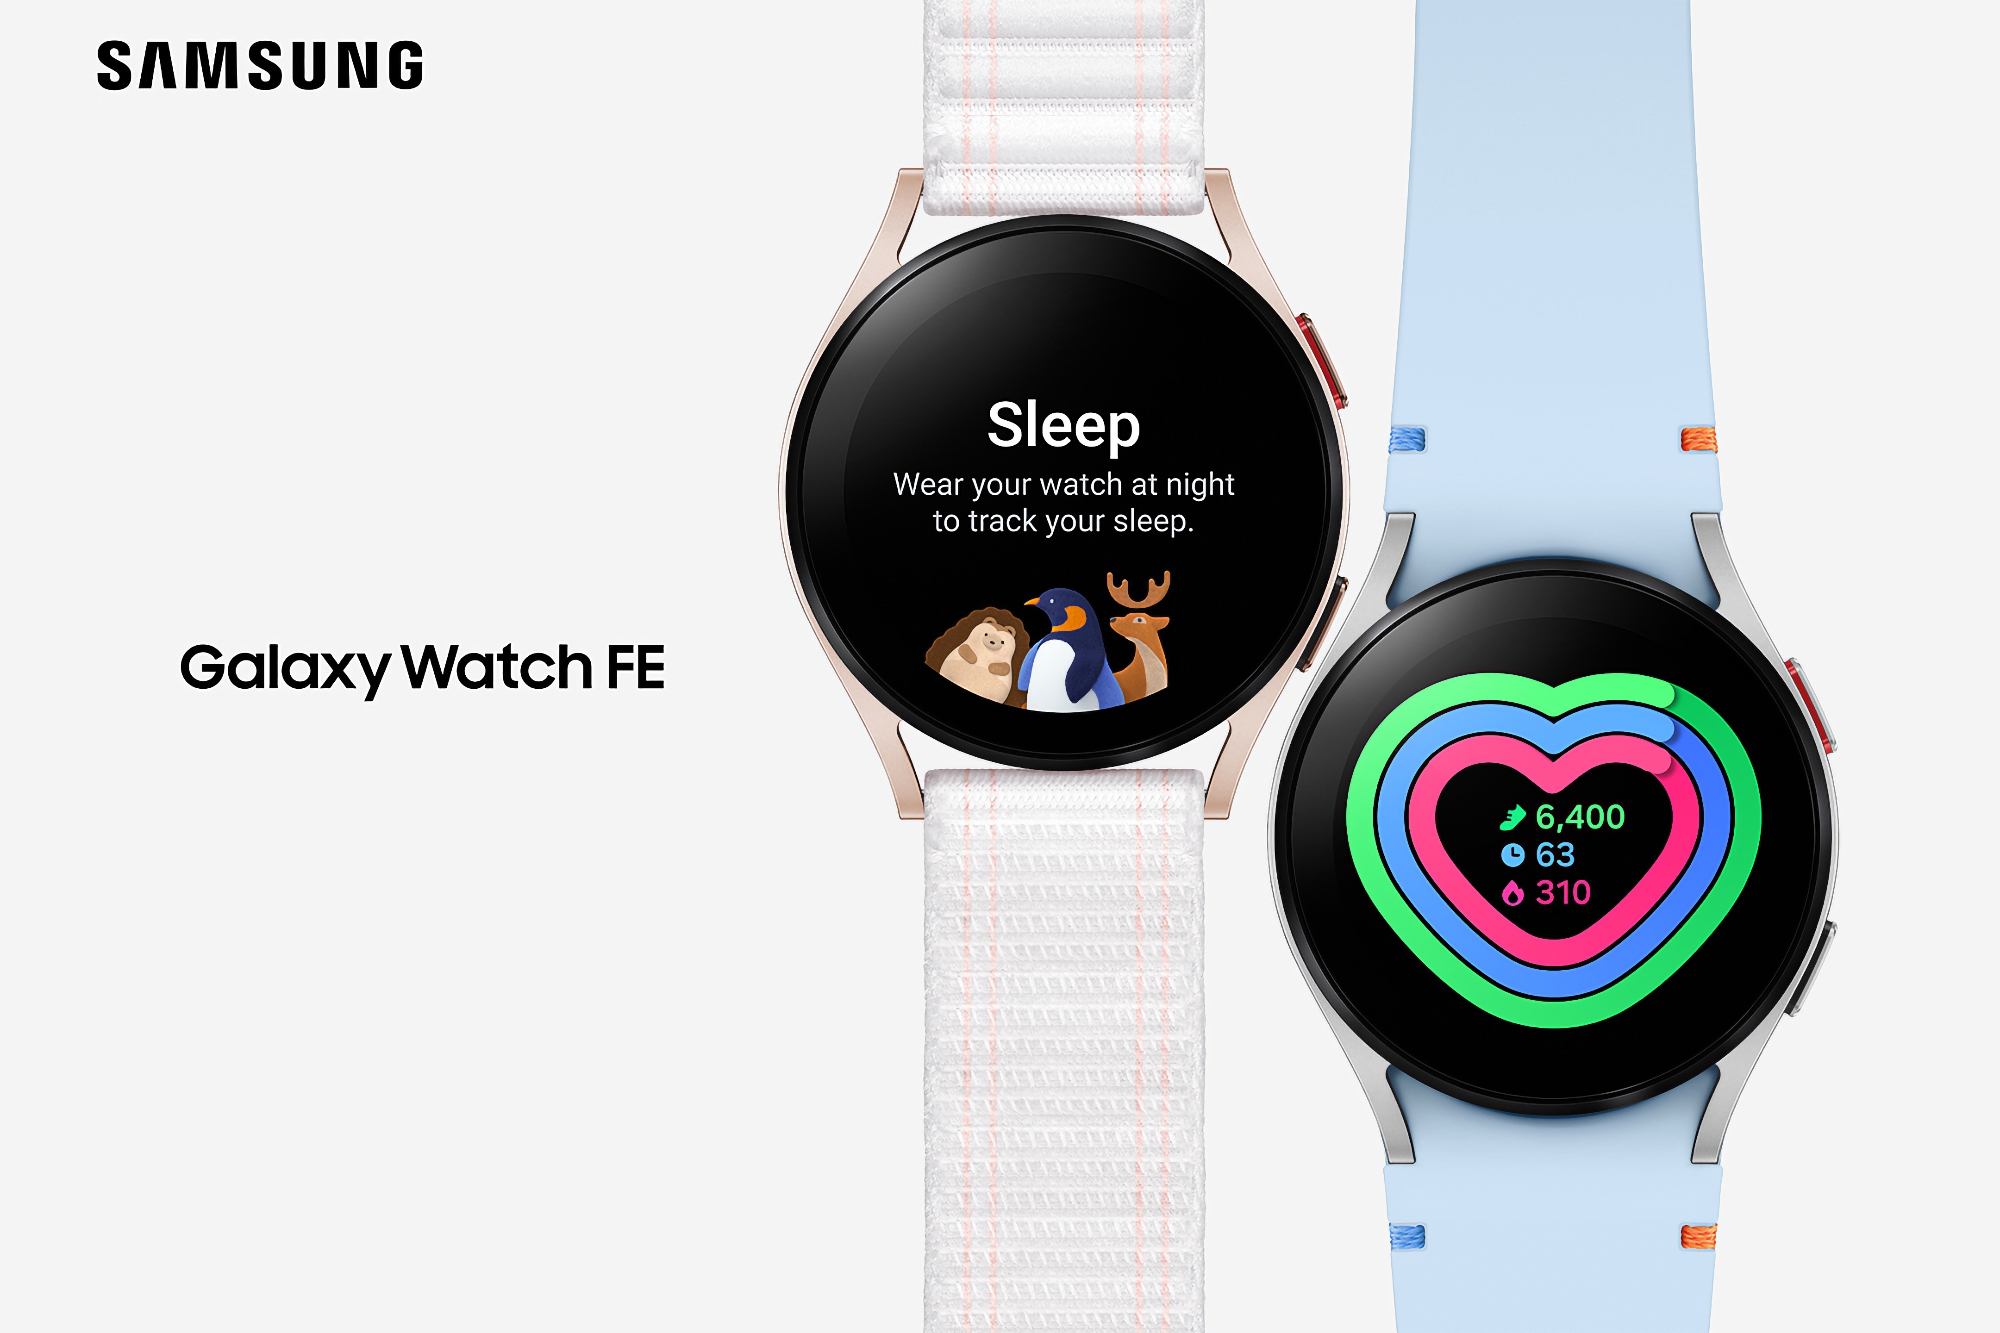 Samsung has re-released the Galaxy Watch 4, it's now the Galaxy Watch FE